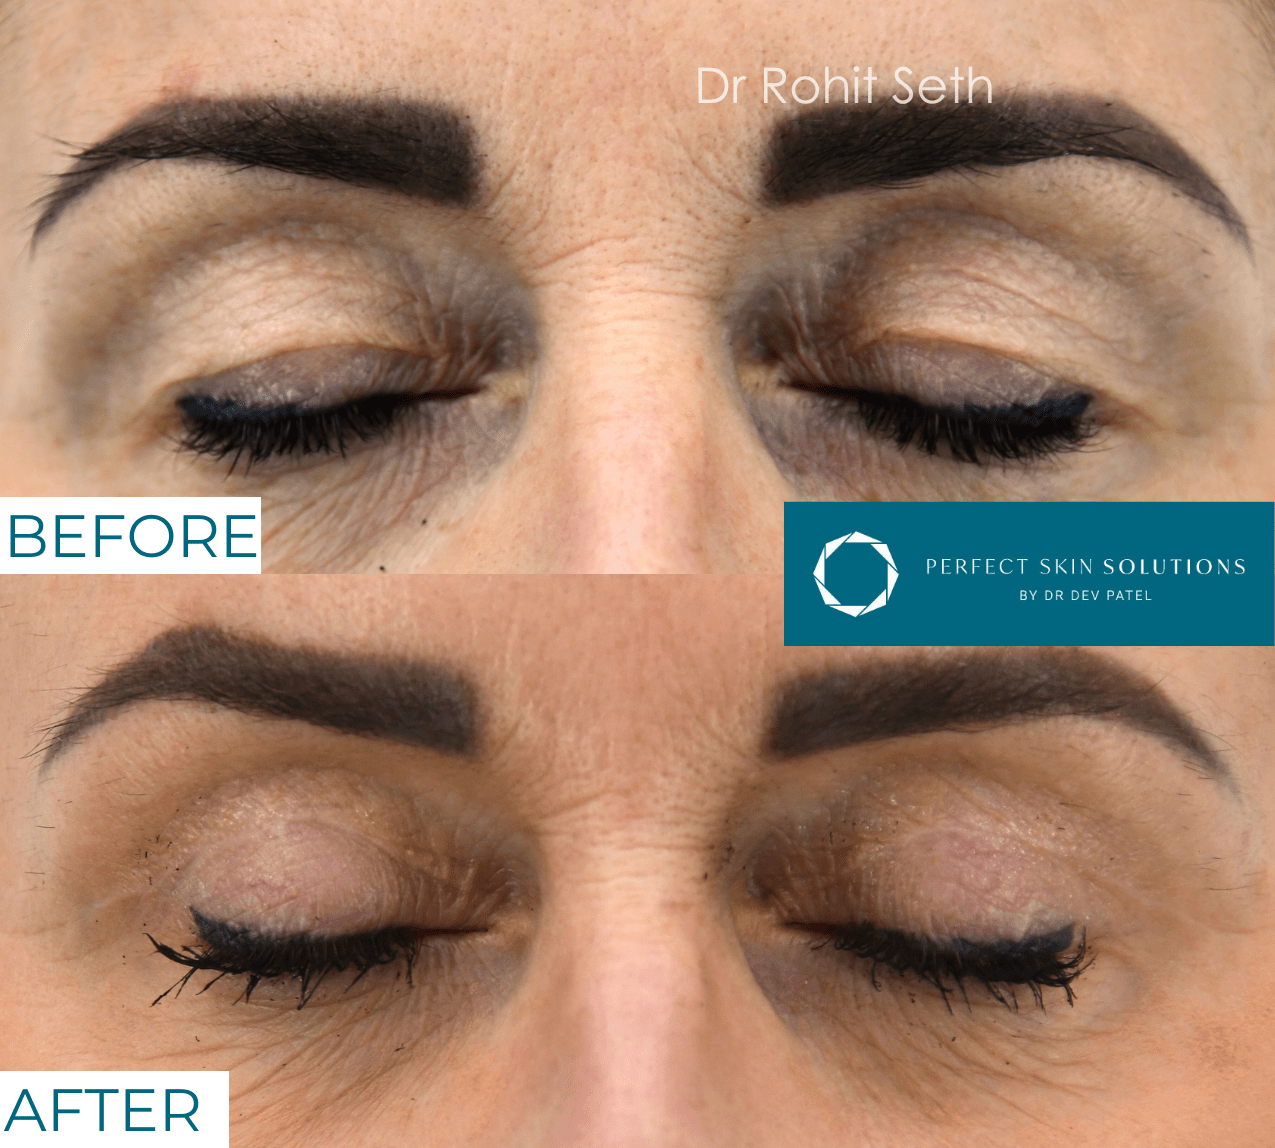 Before and after photo of eyes from blepharoplasty eyelid surgery woman eyes closed